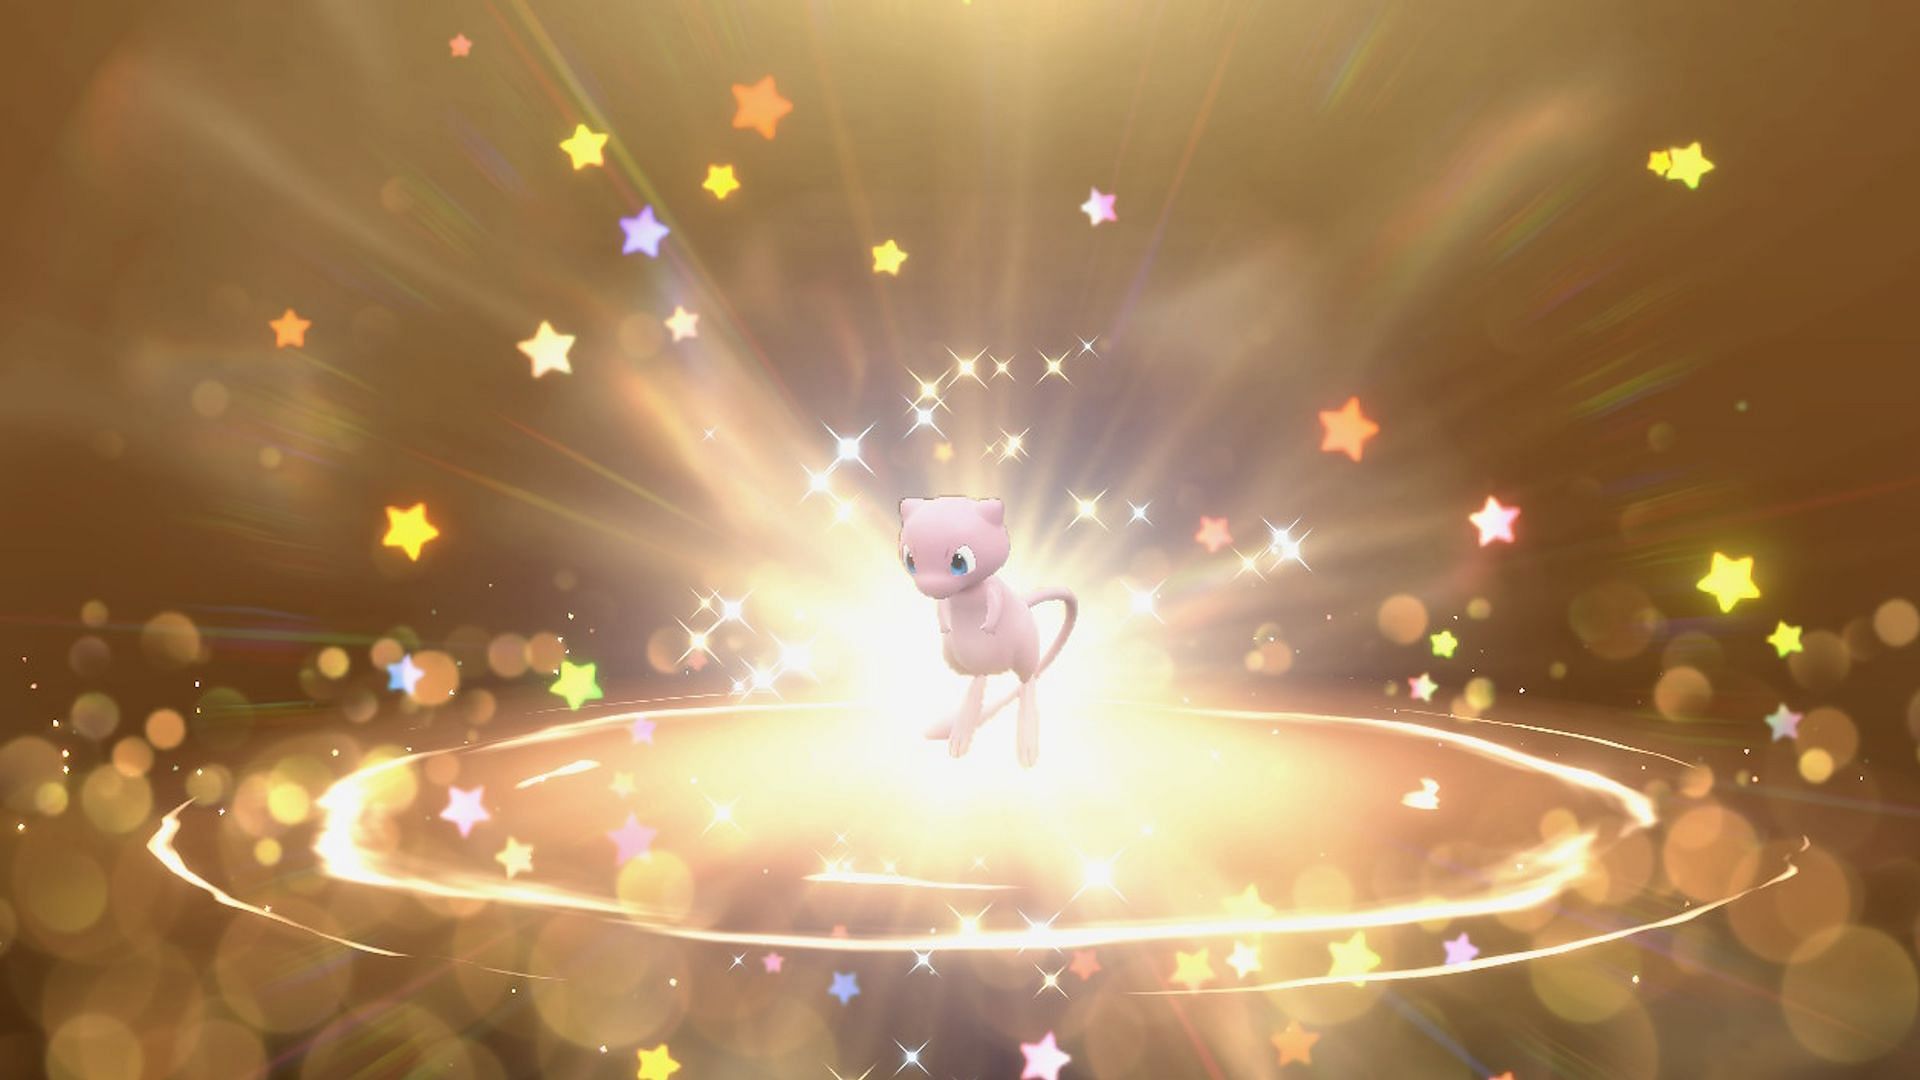 Pokemon Scarlet & Violet Mew Guide: How to Get Mew